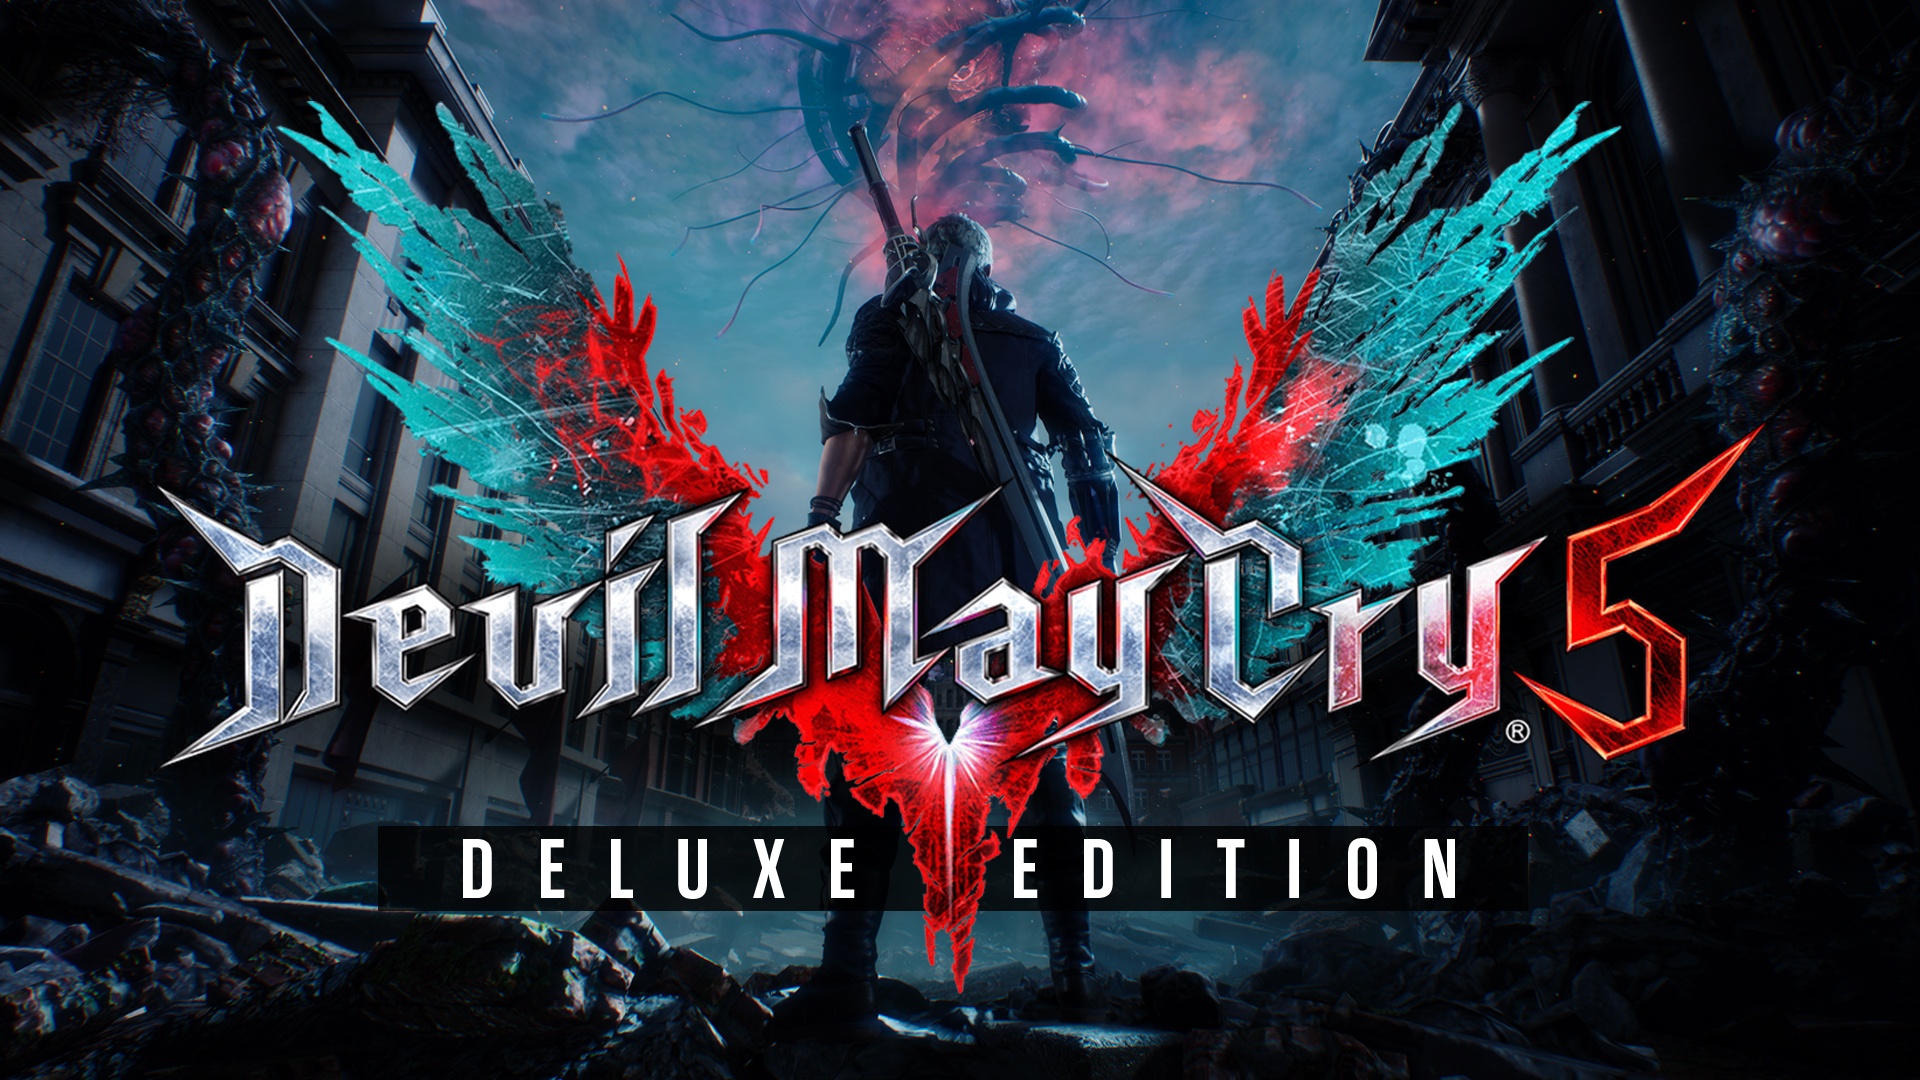 devil may cry 5 pc